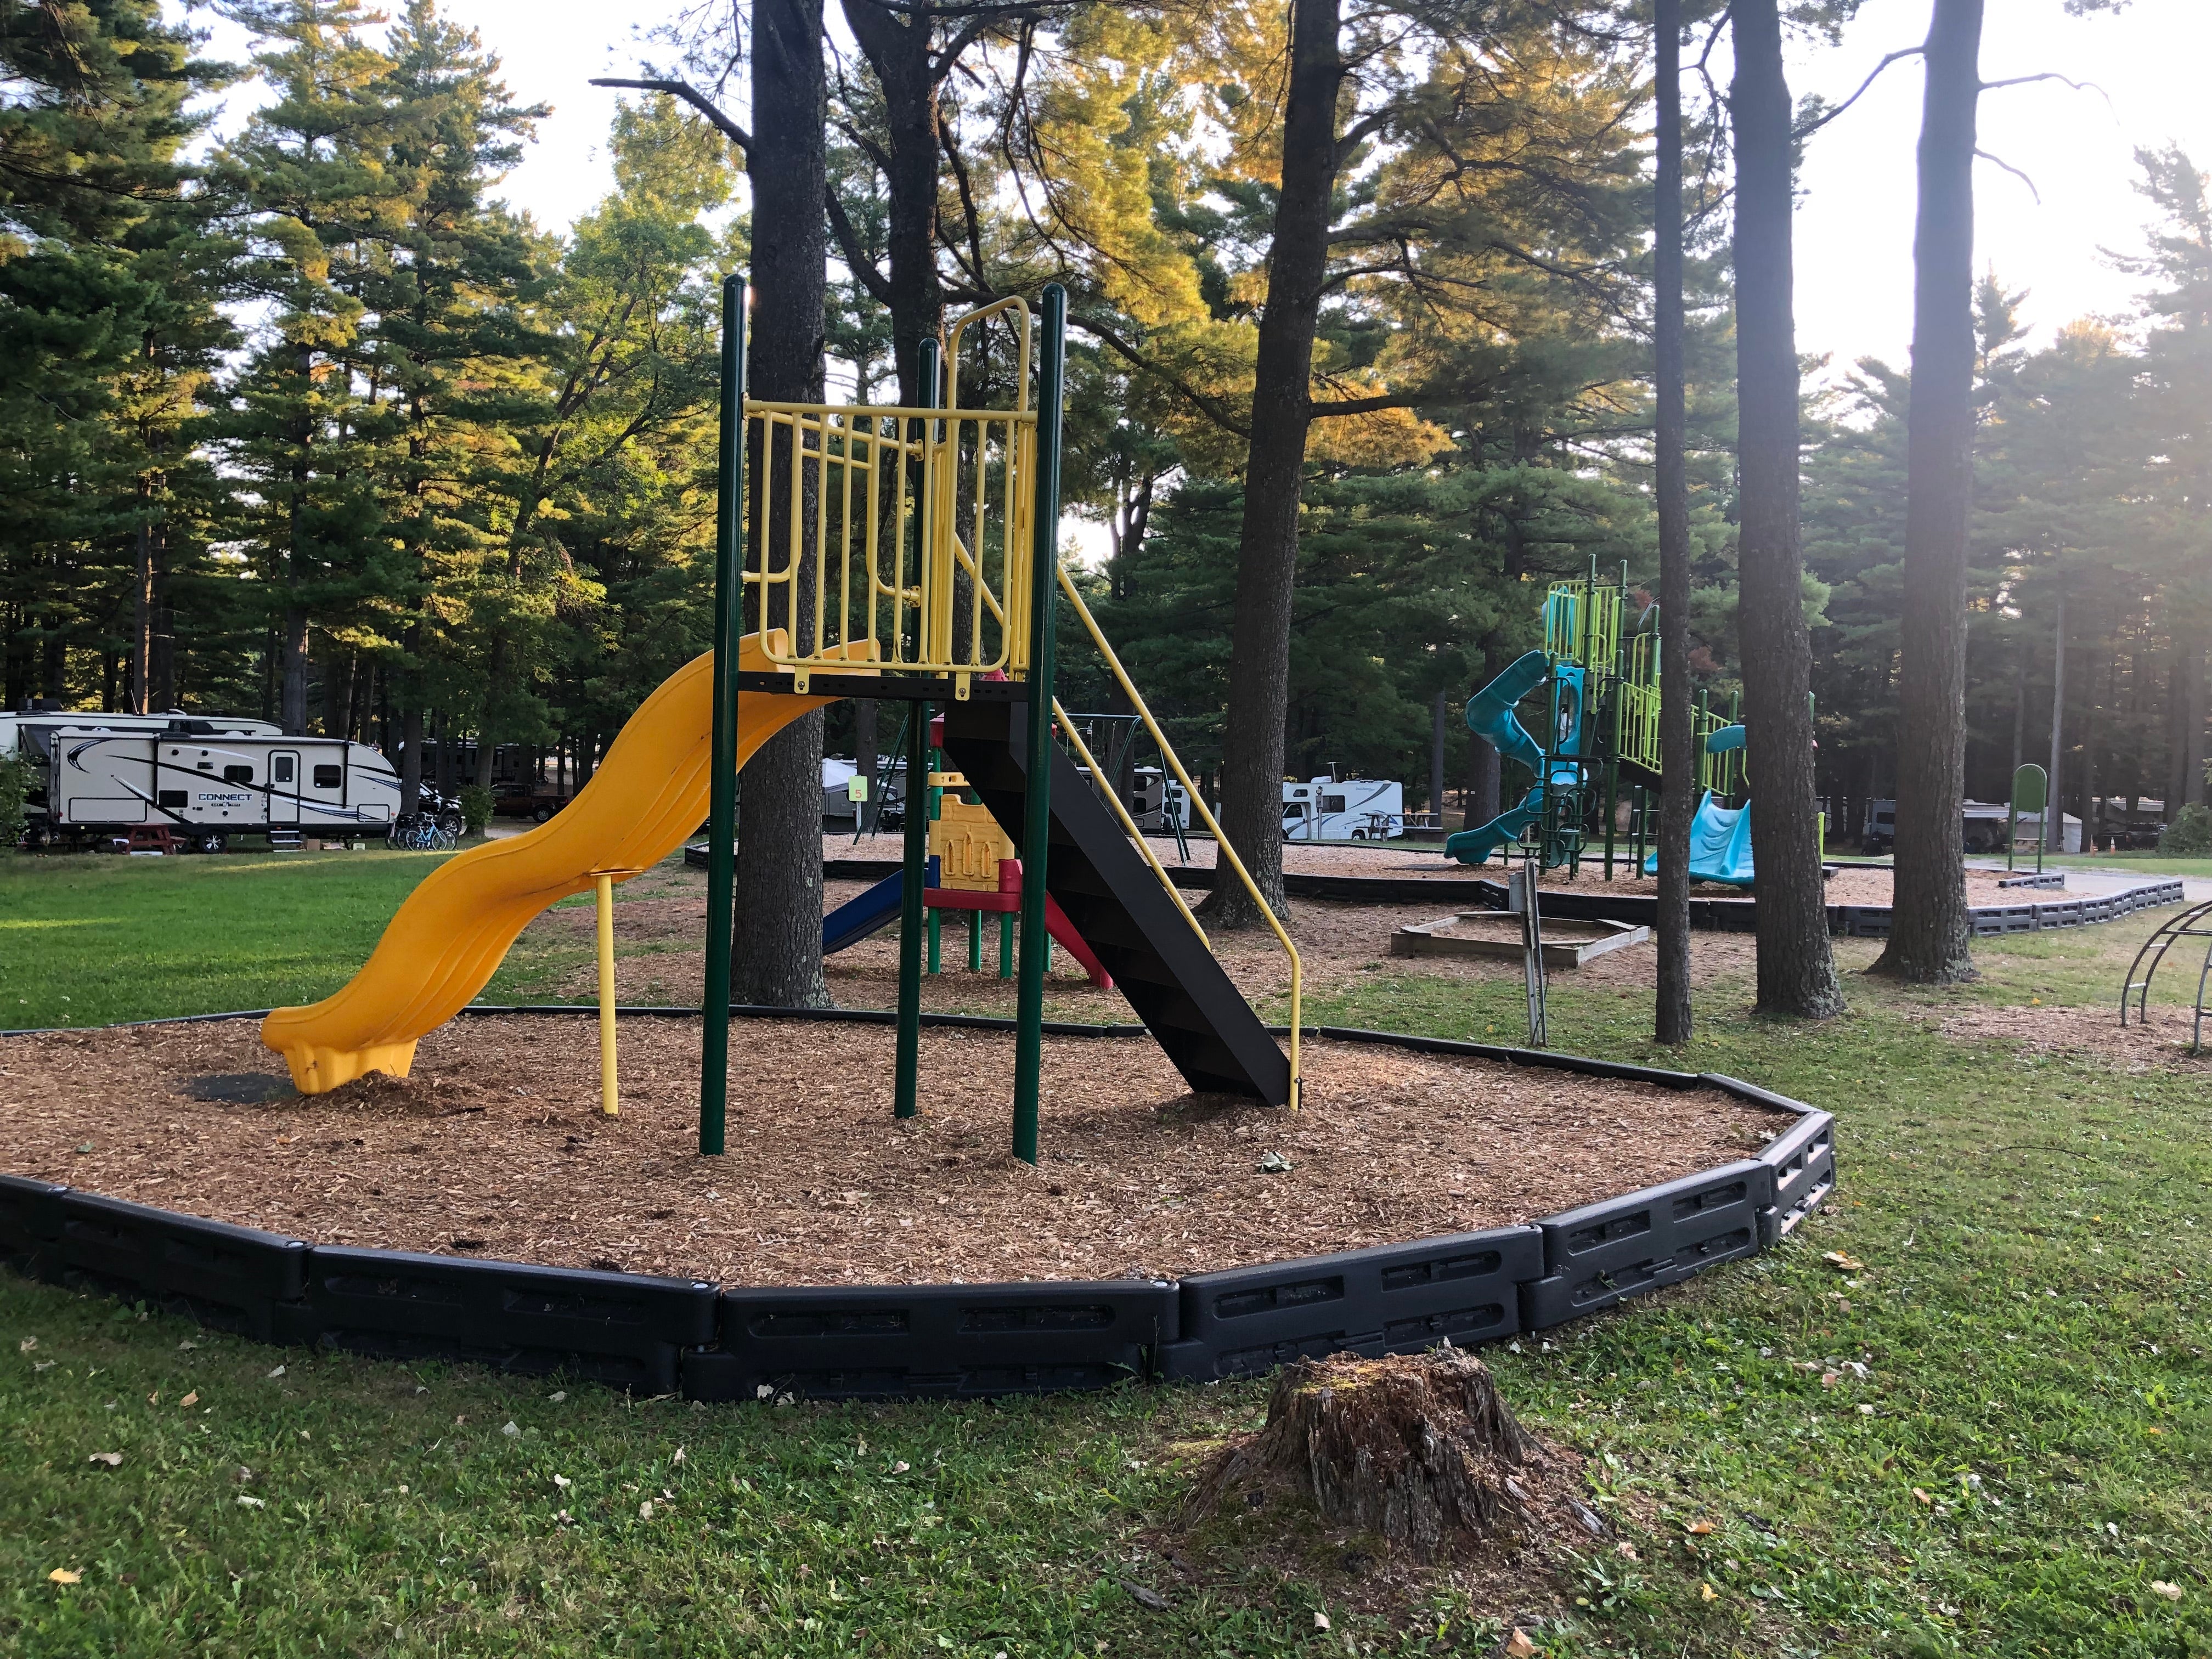 Another view of the large playground